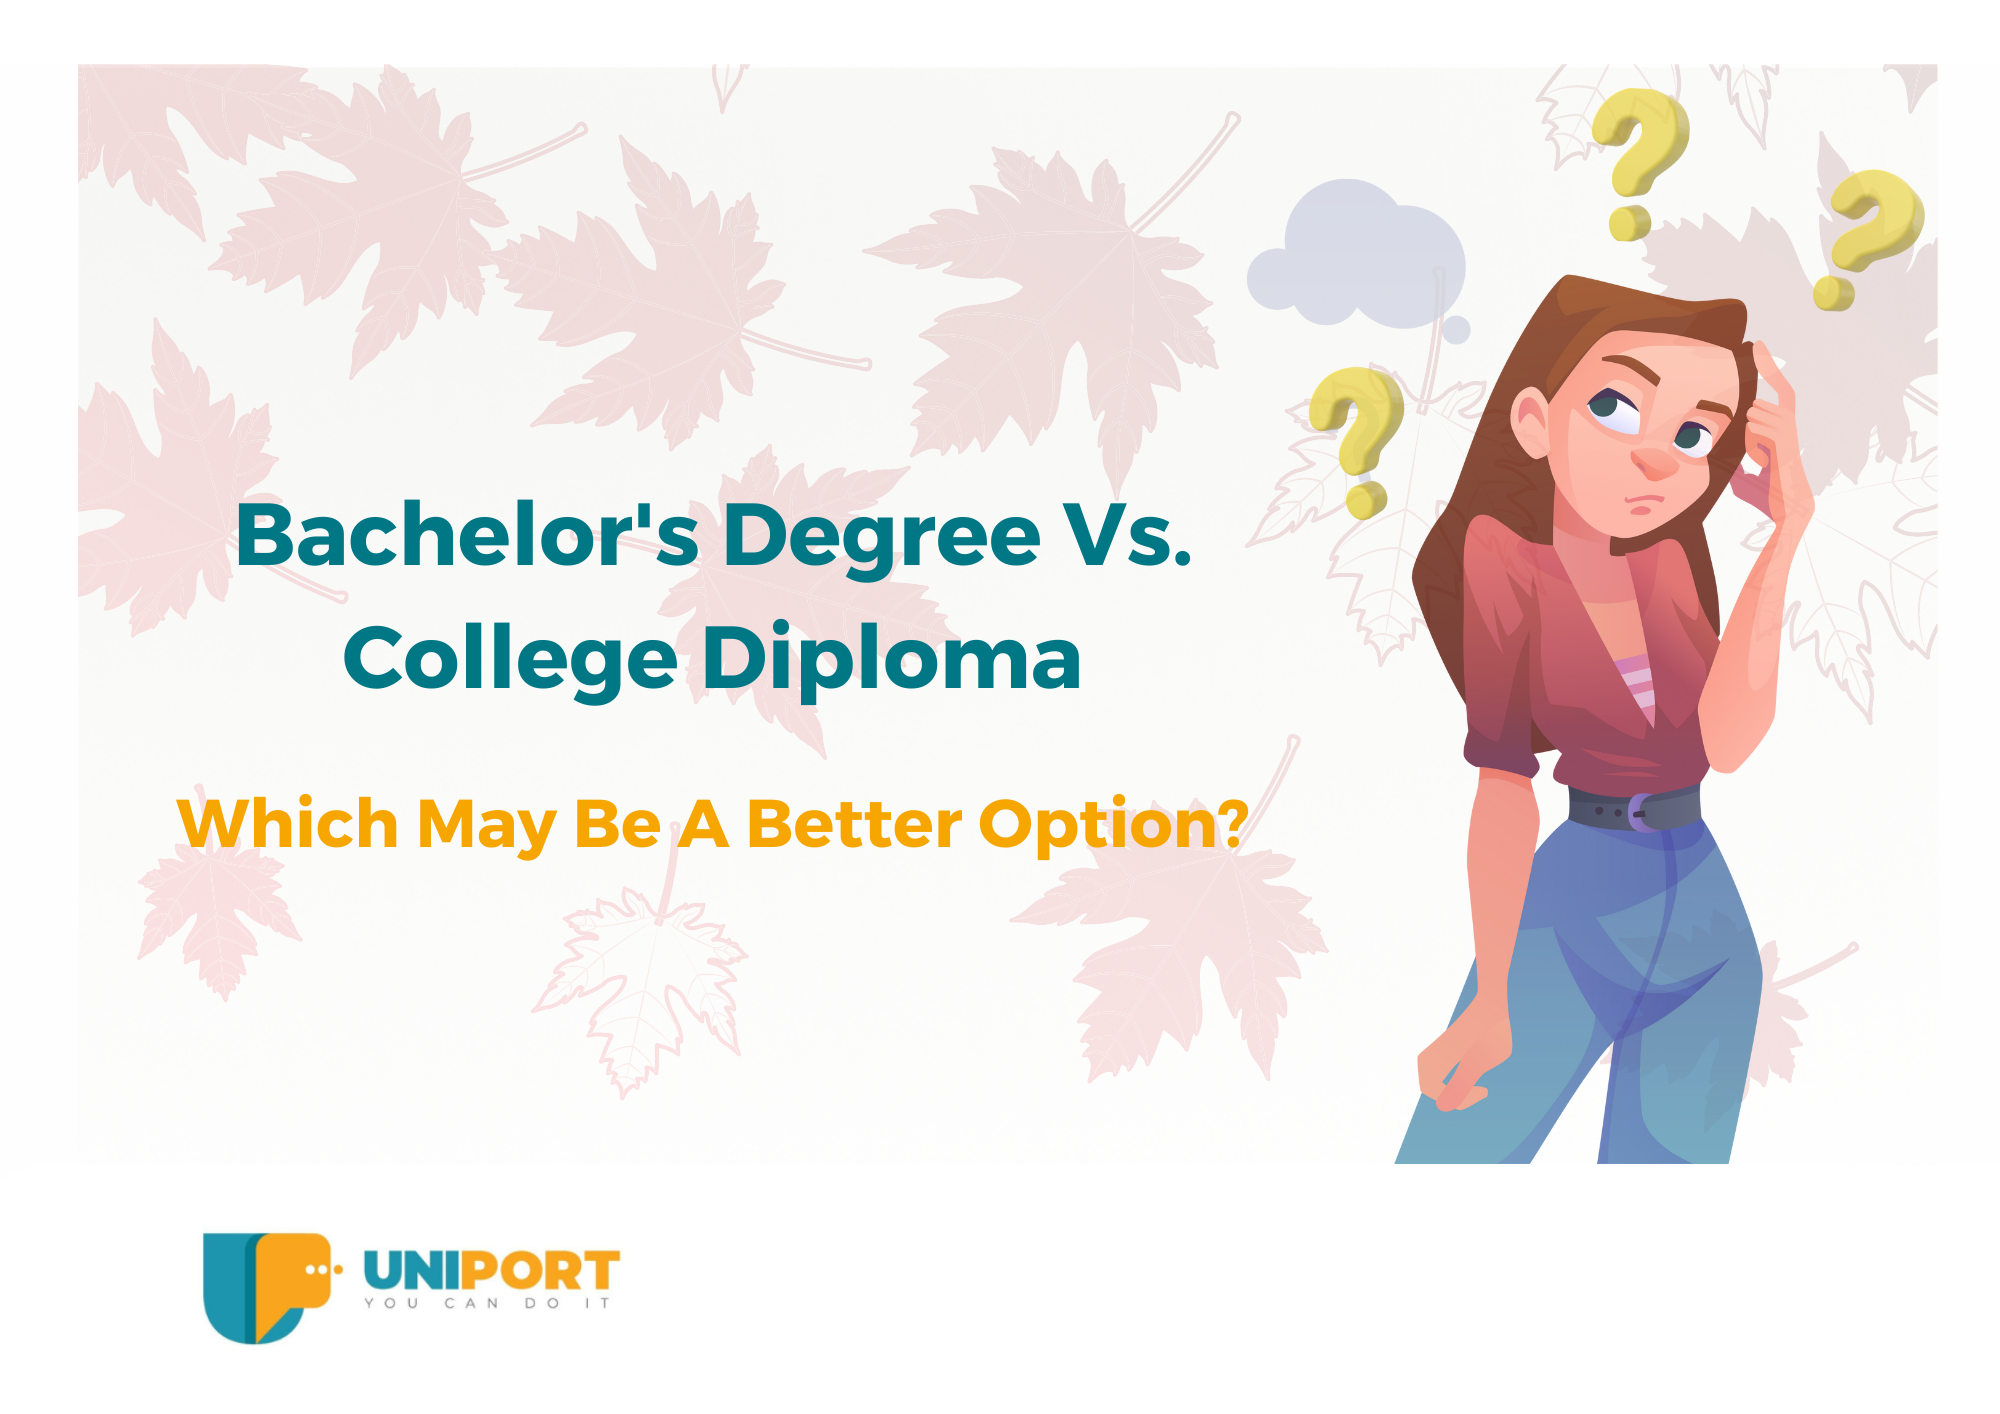 Bachelor's Degree Vs. College Diploma: Which May Be A Better Option?